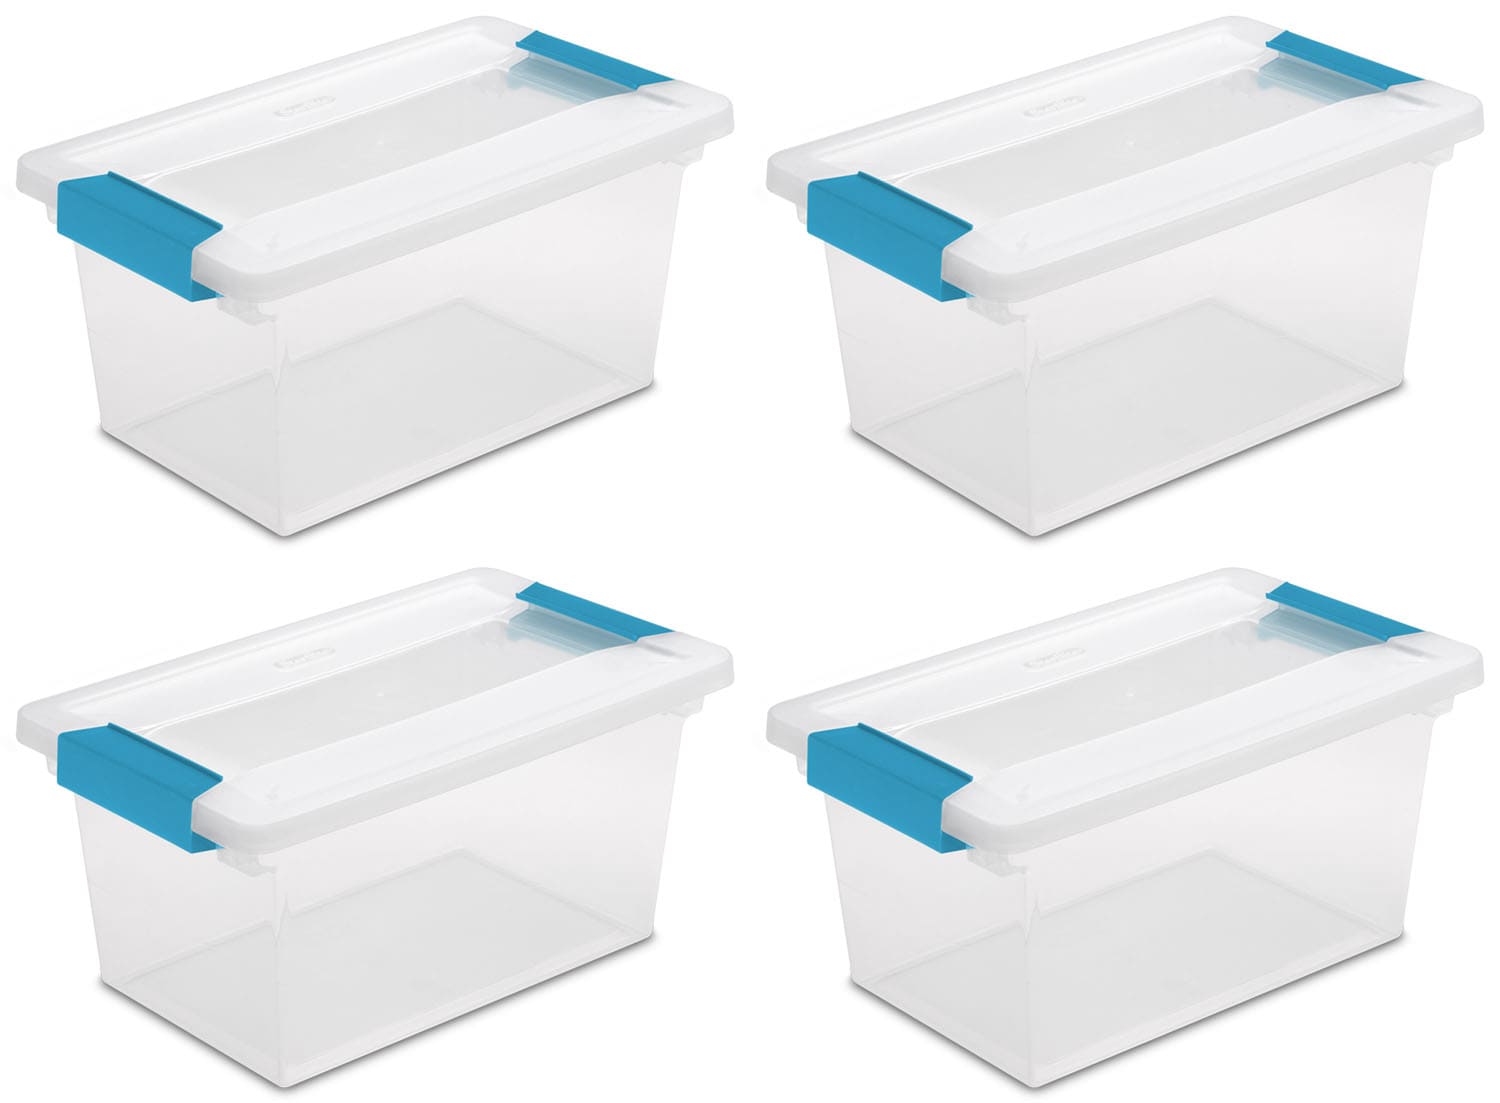  Sterilite Miniature Clip Storage Box w/Latch Lid, 6 Pack, &  Medium Clip Storage Box w/Latch Lid, 4 Pack for Home, Office, and Workspace  Organization : Office Products